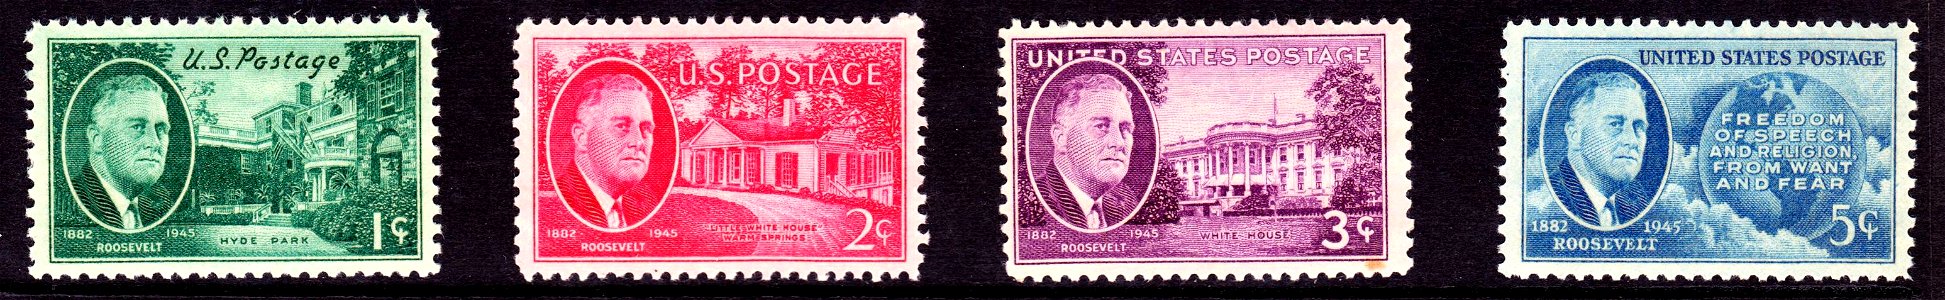 FDR Set4 1945 Issue. Free illustration for personal and commercial use.